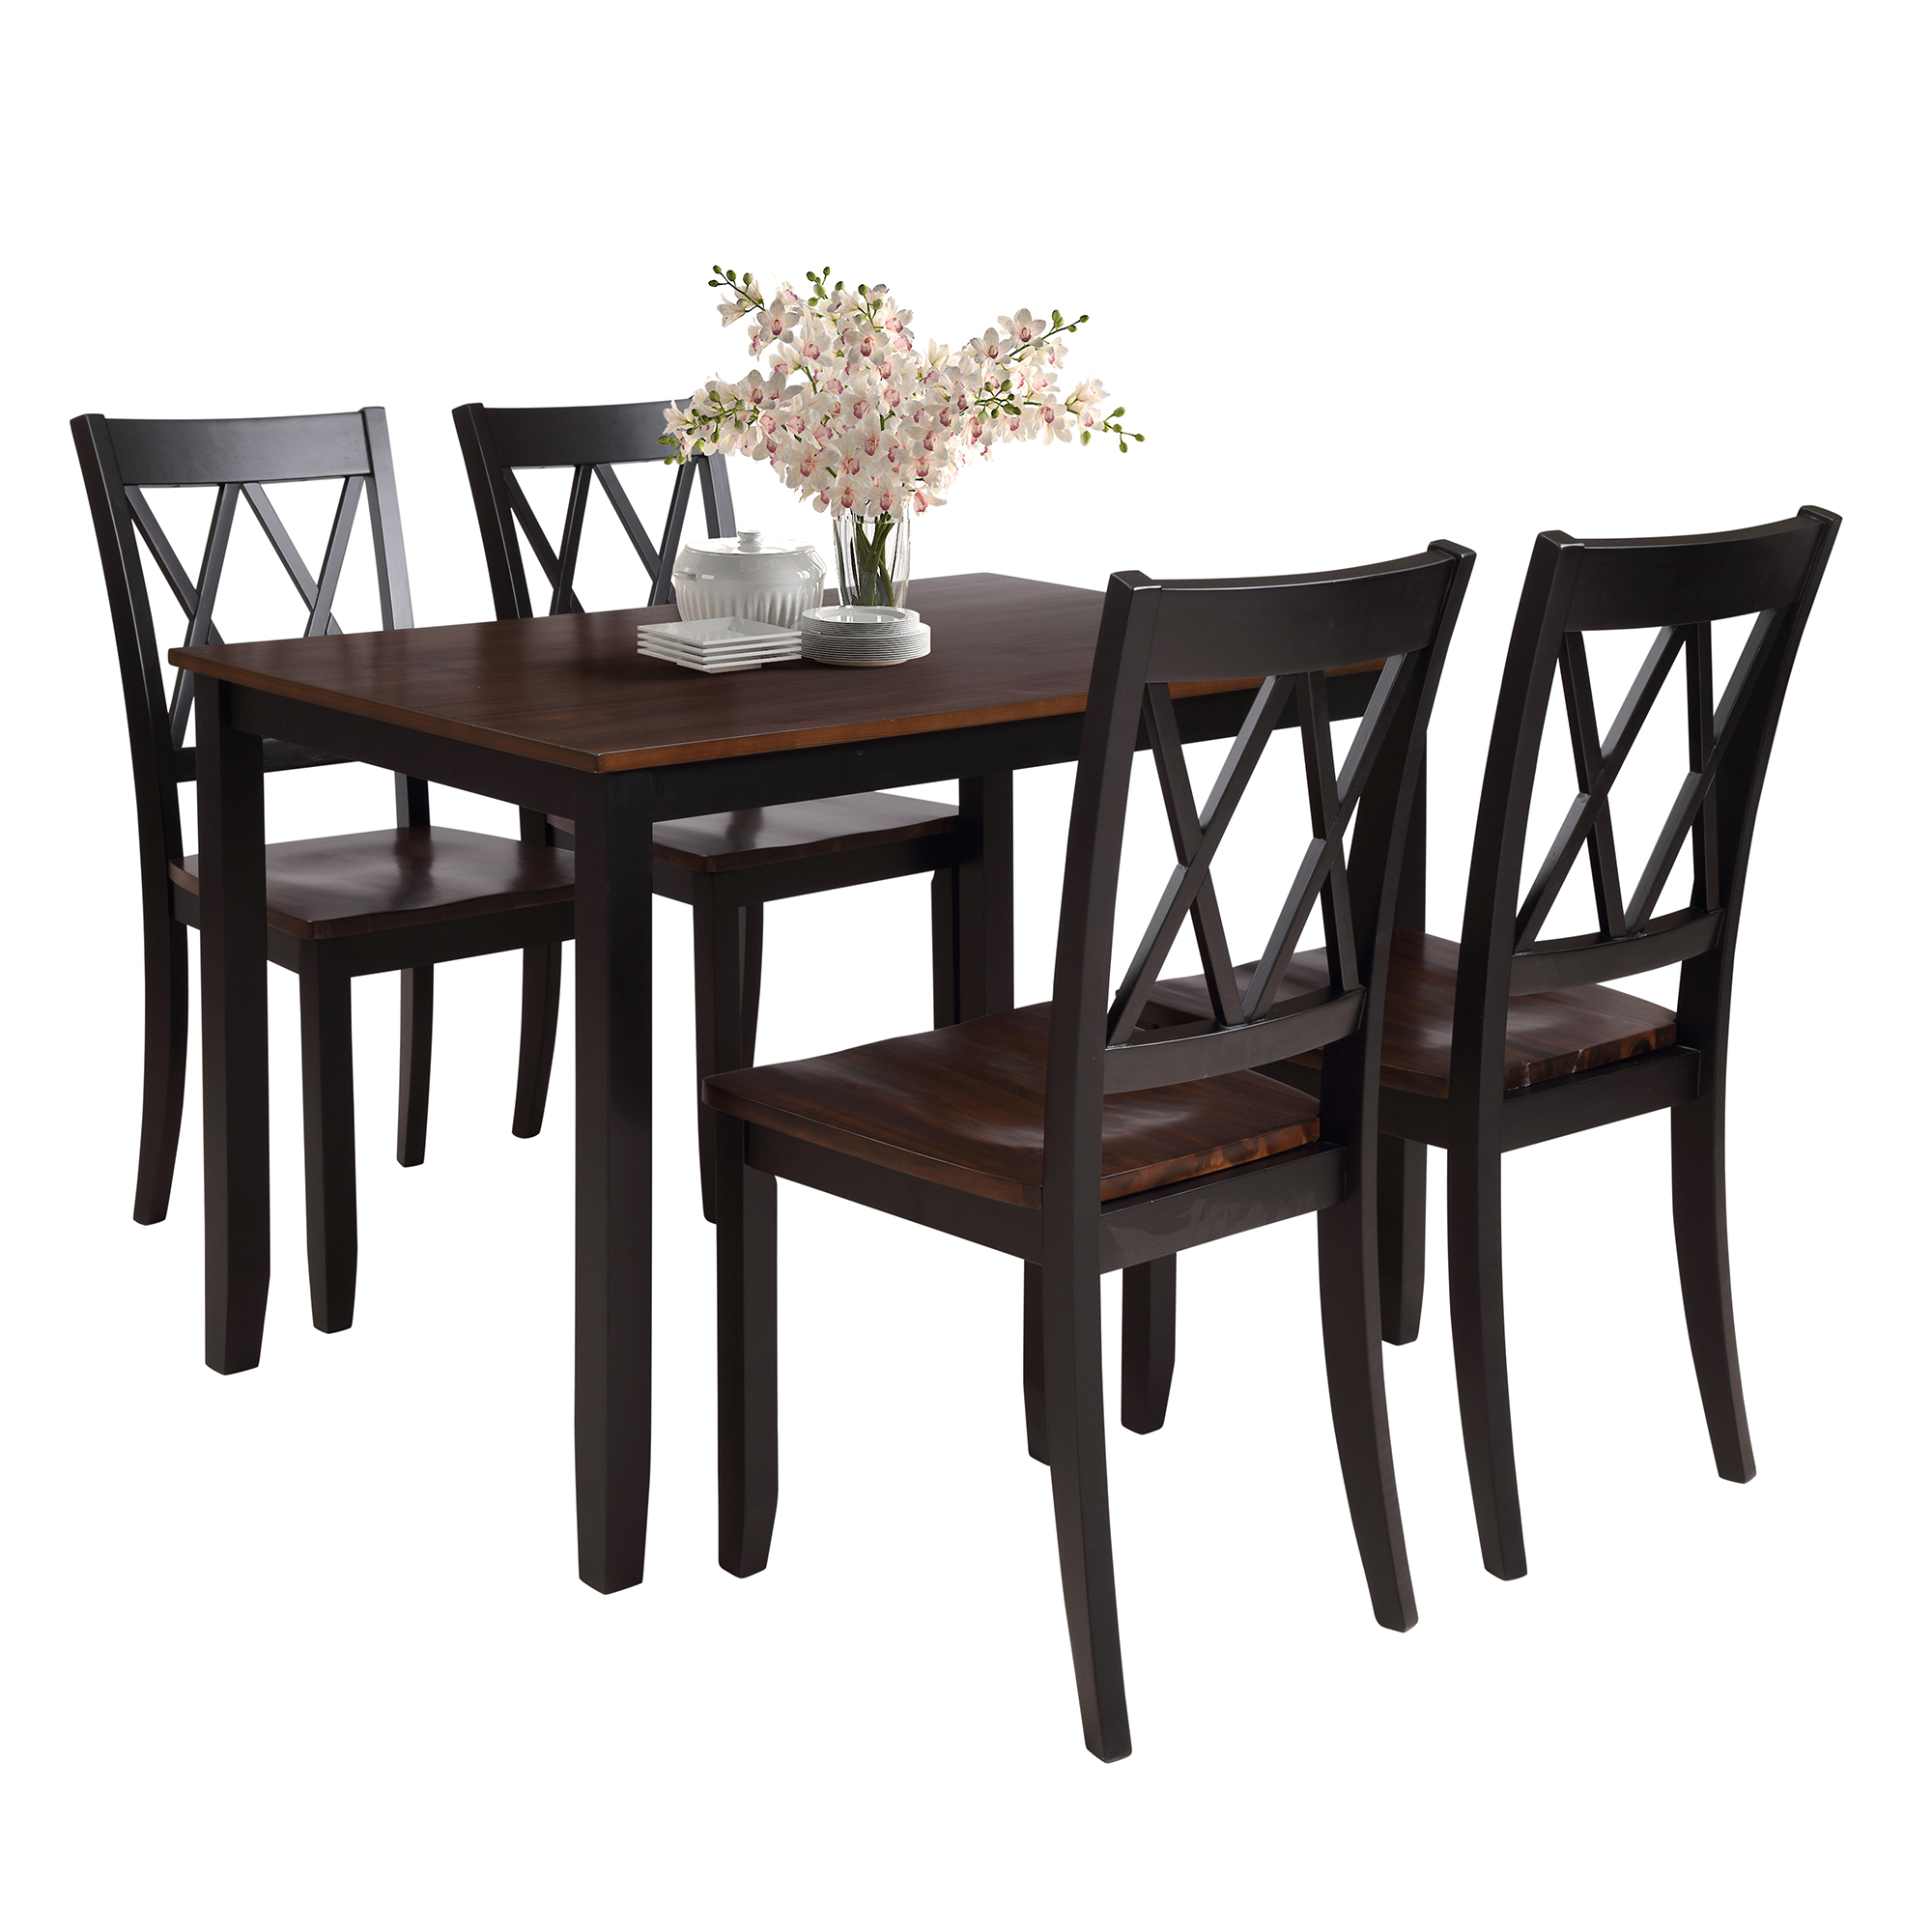  5-Piece Dining Table Set Home Kitchen Table and Chairs Wood Dining Set (Black+Cherry)-CASAINC